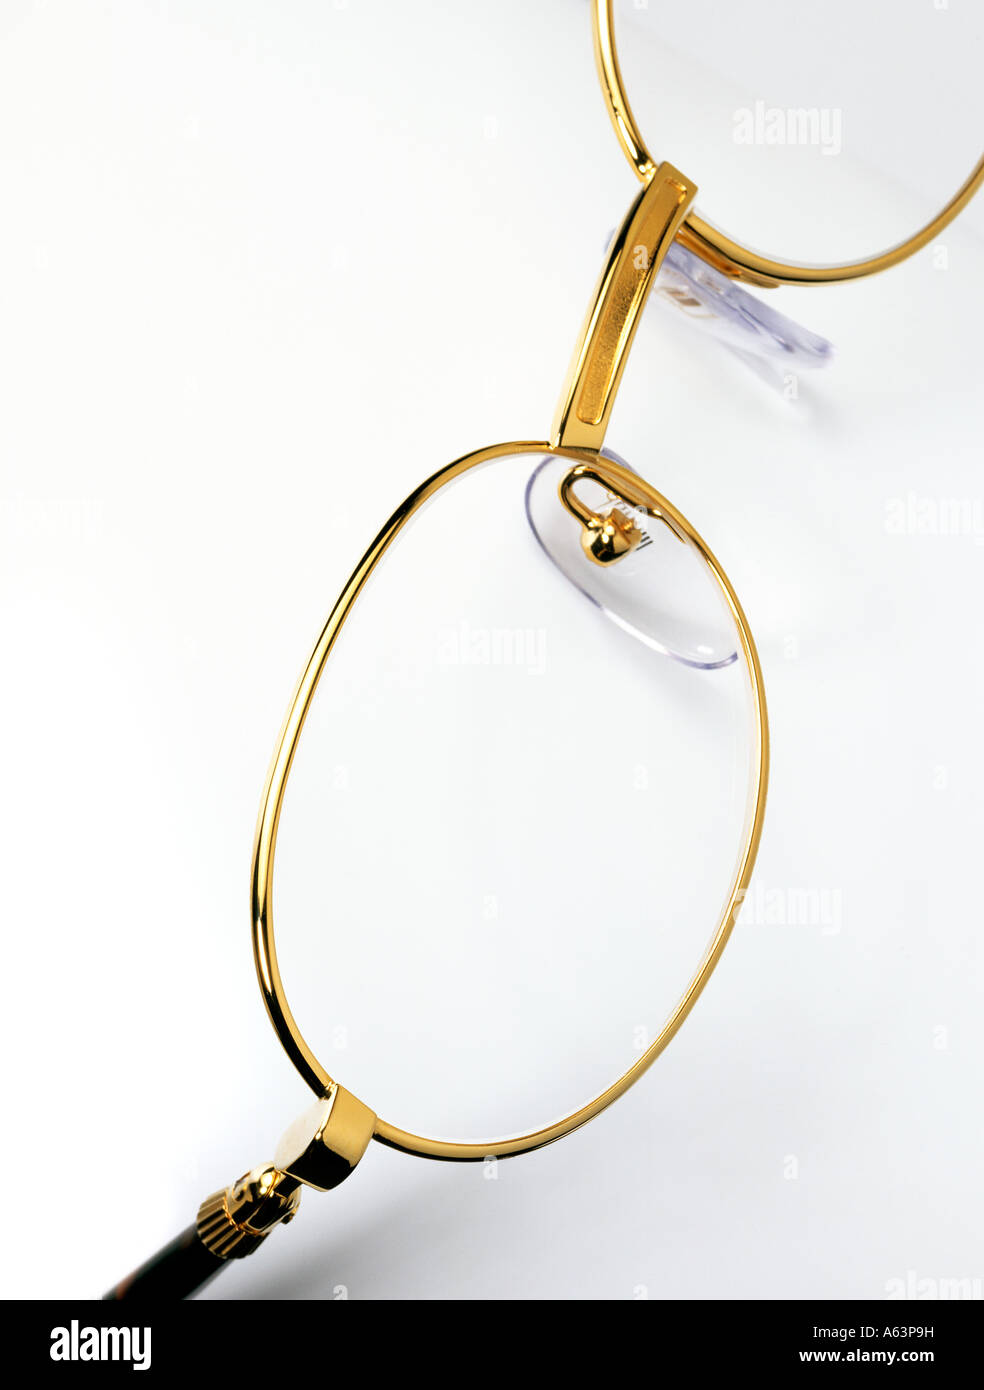 Spectacles. Picture by Paddy McGuinness paddymcguinness. Stock Photo